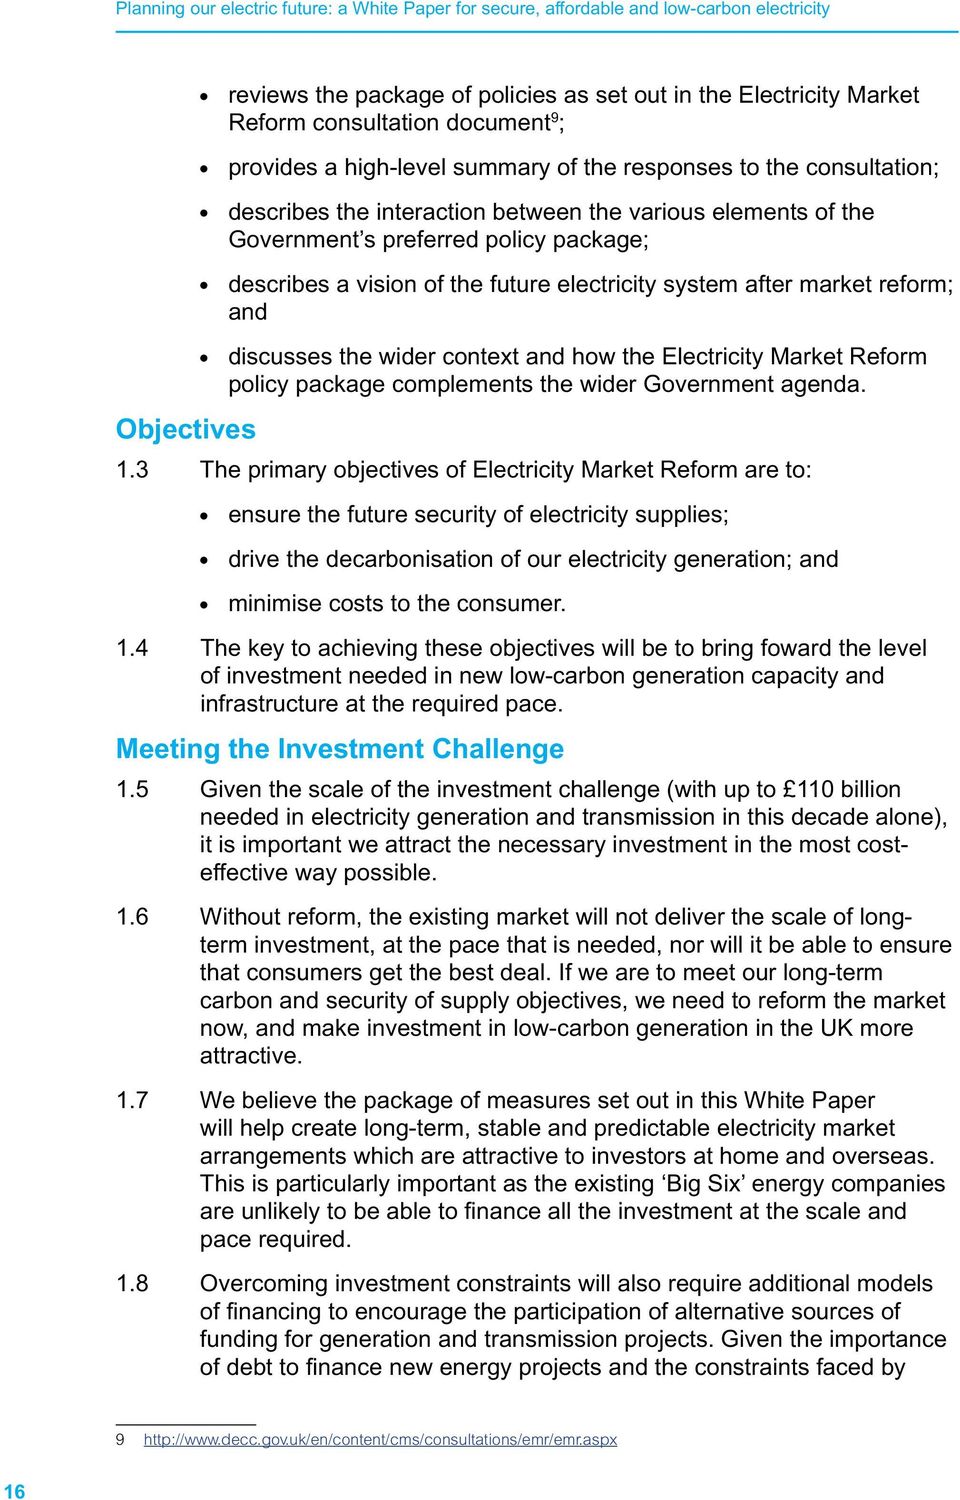 Electricity Market Reform policy package complements the wider Government agenda. Objectives 1.